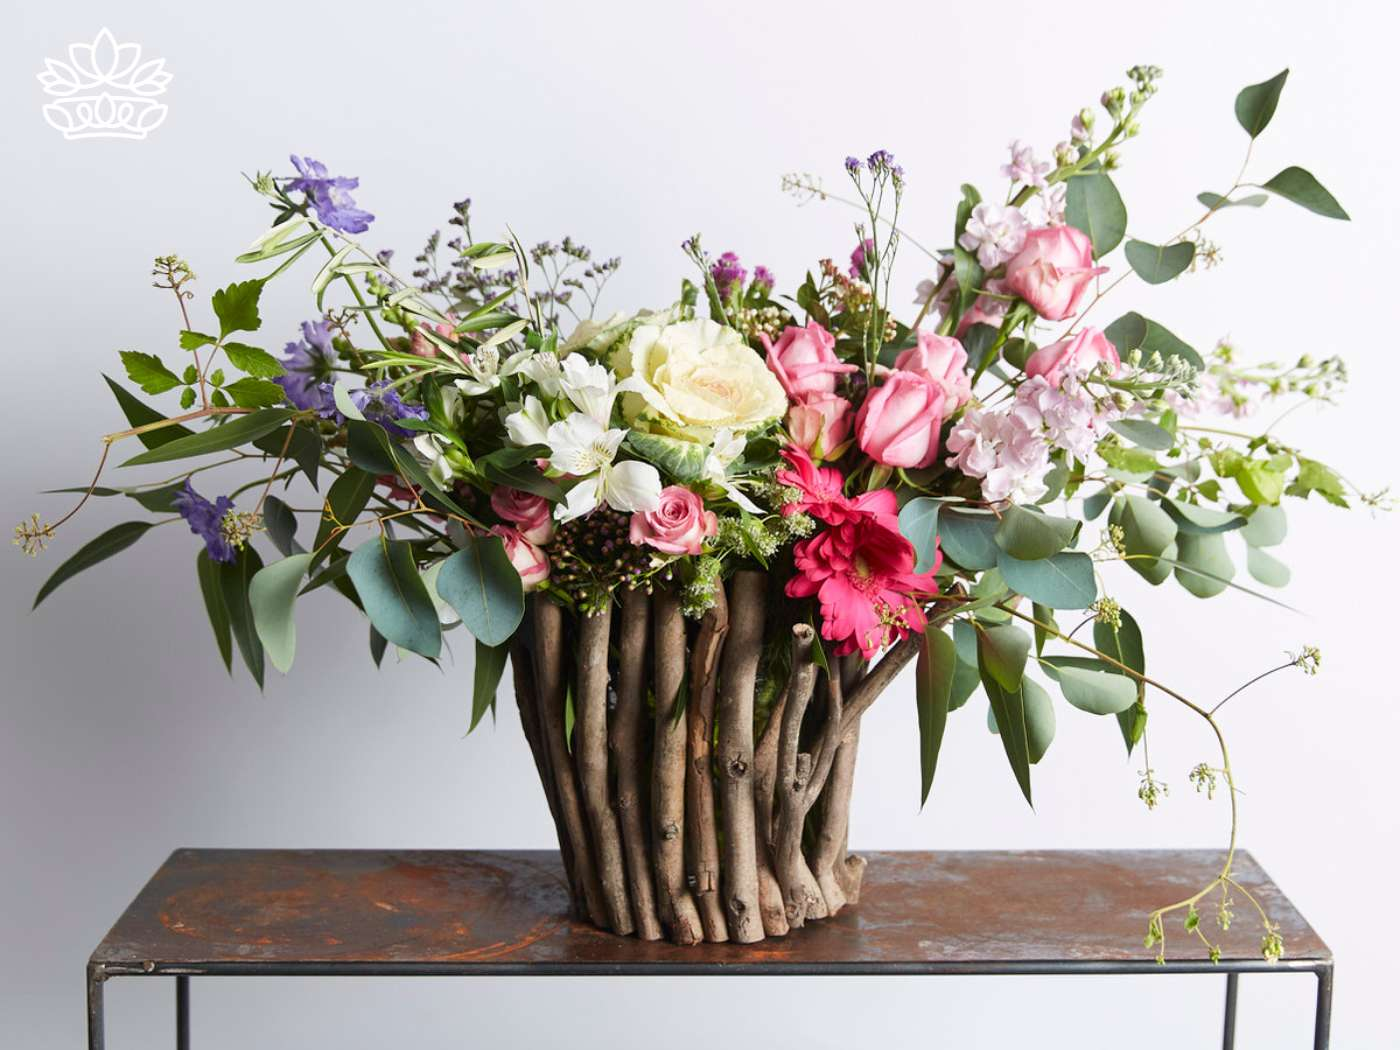 Rustic charm floral arrangement with pink roses, white lilies, and a mix of delicate flowers in a natural twig vase, available at Fabulous Flowers and Gifts.